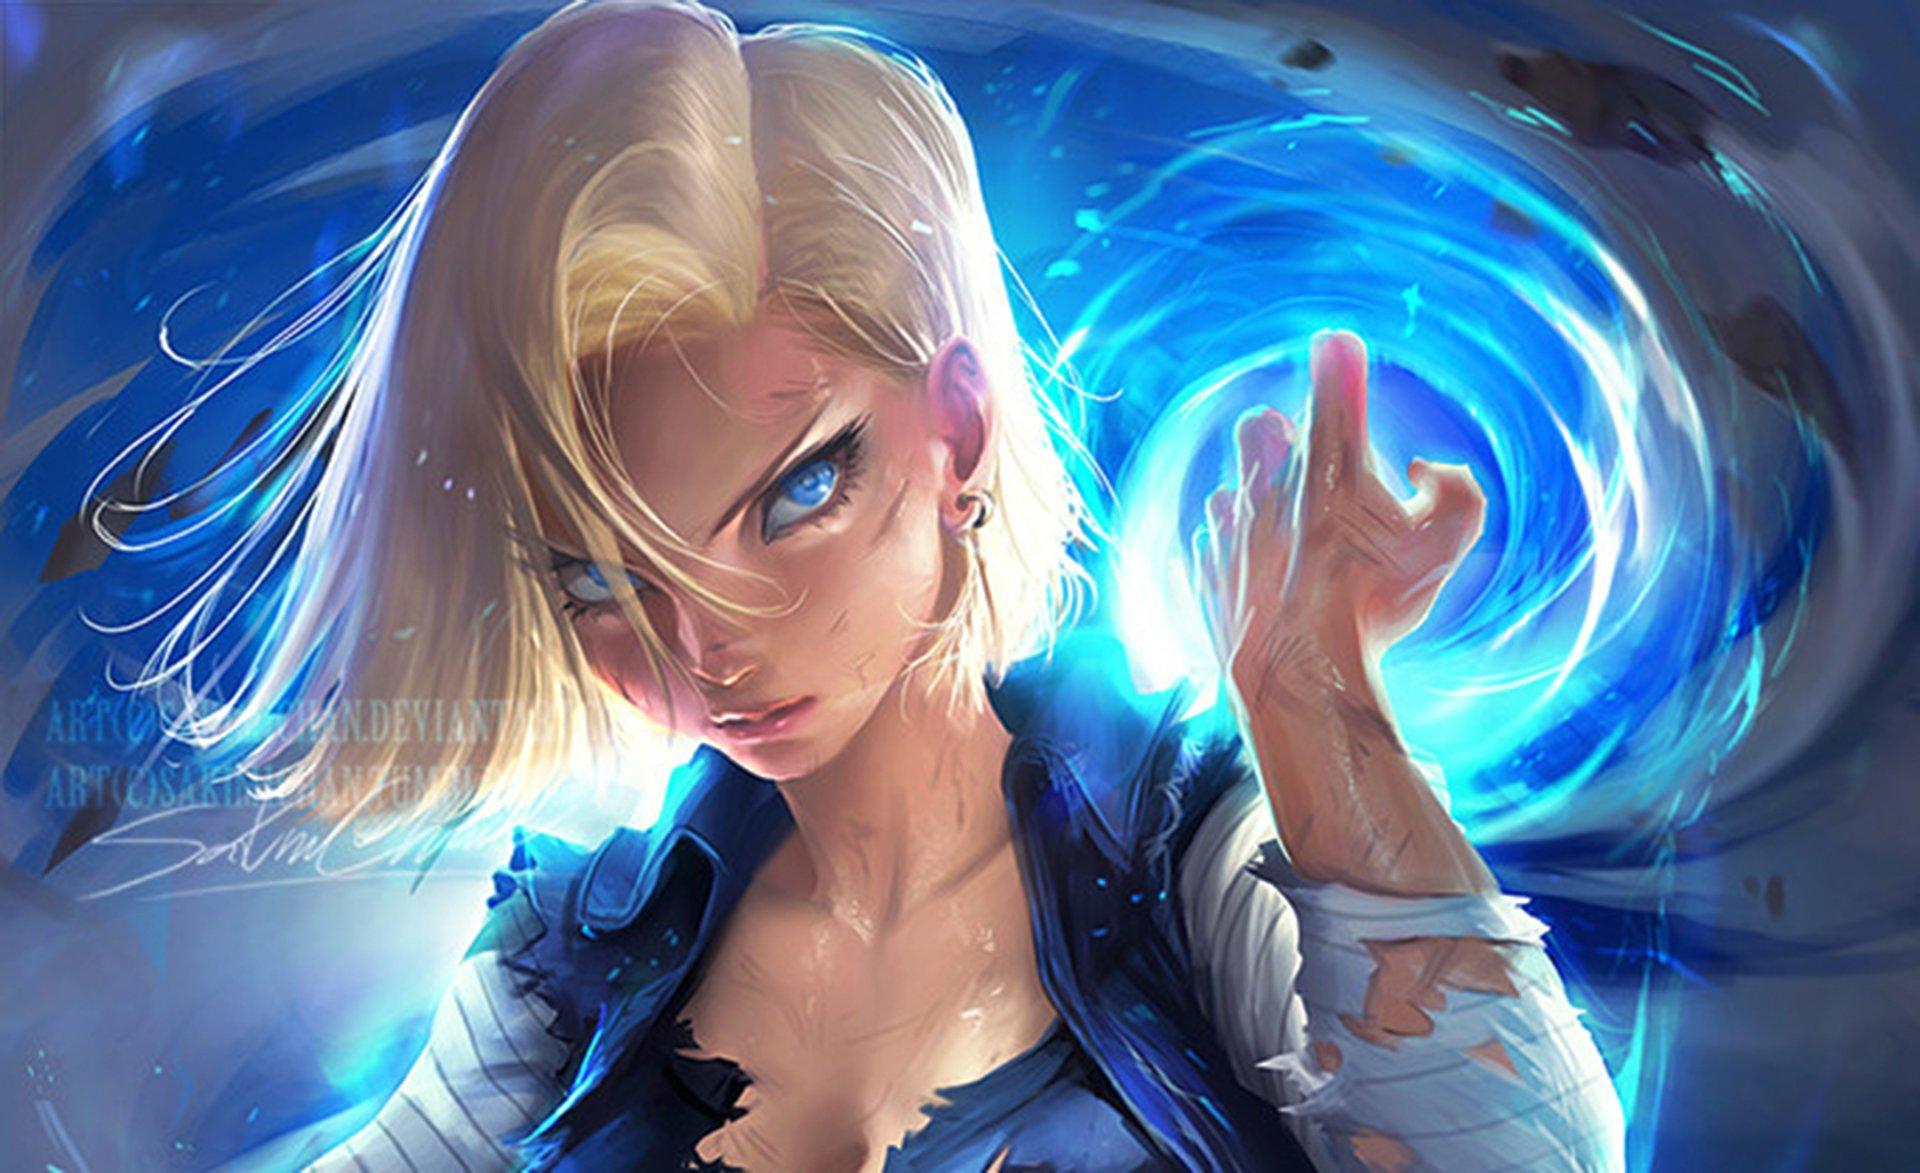 Android 18 HD Wallpaper. Background Imagex1173